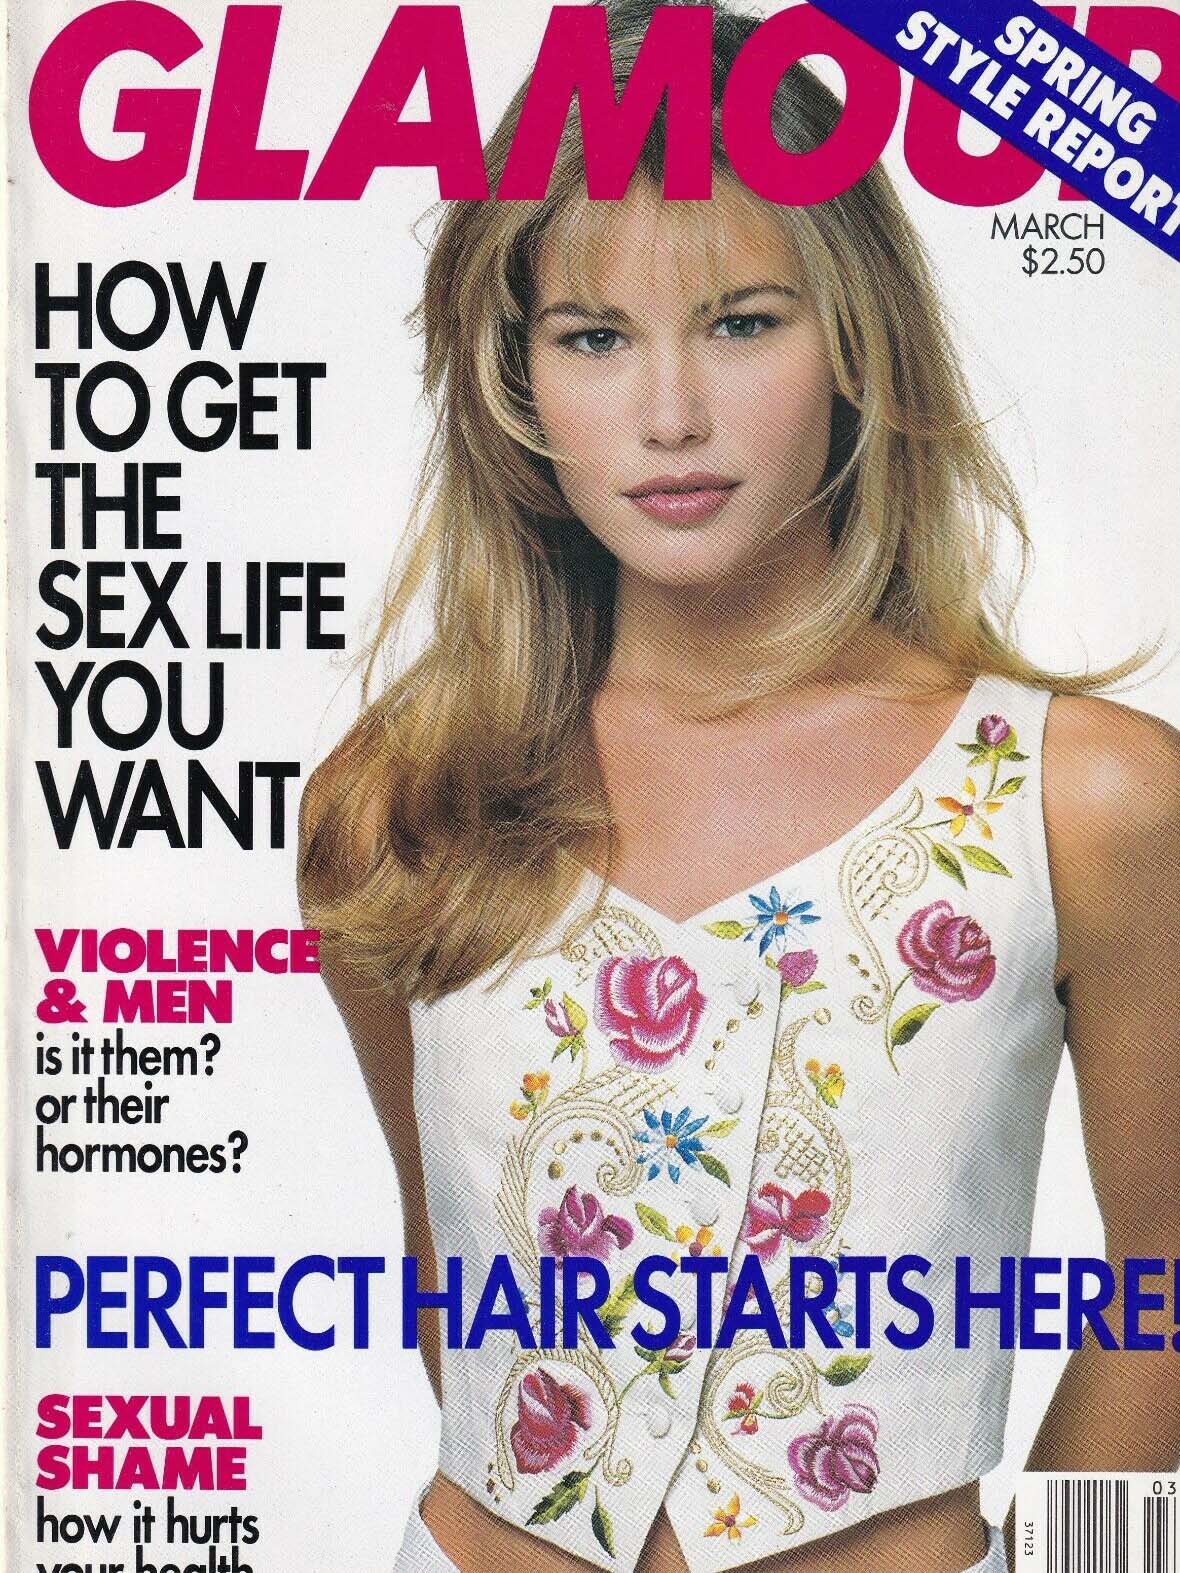 Glamour March 1994 magazine back issue Glamour magizine back copy Glamour March 1994 Womens Magazine Back Issue Published by Conde Nast Publications. How To Get The Sex Life You Want.